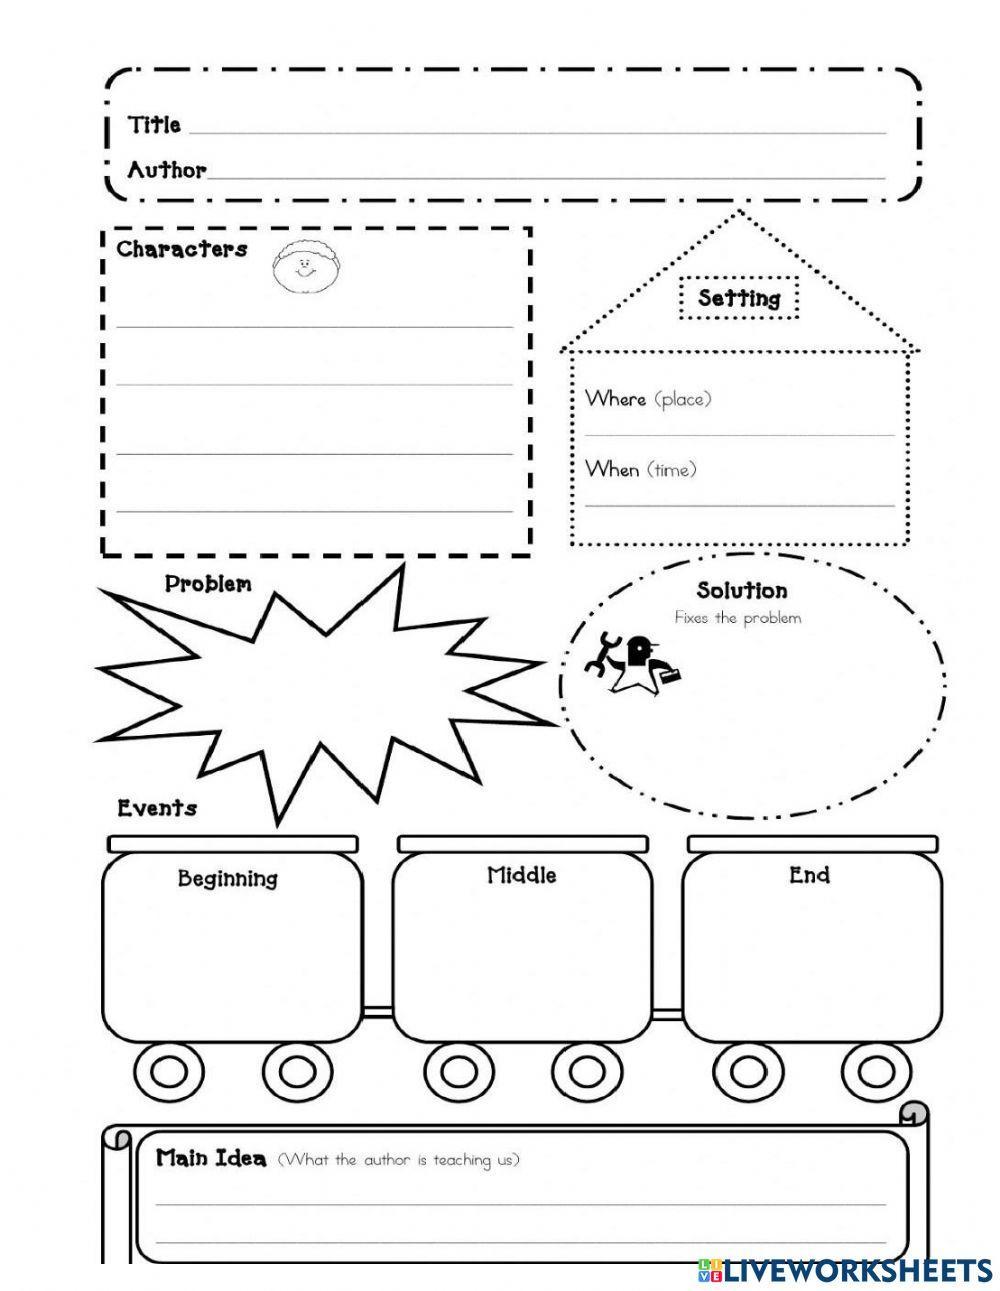 Final Assessment - Story Elements Graphic Organizer